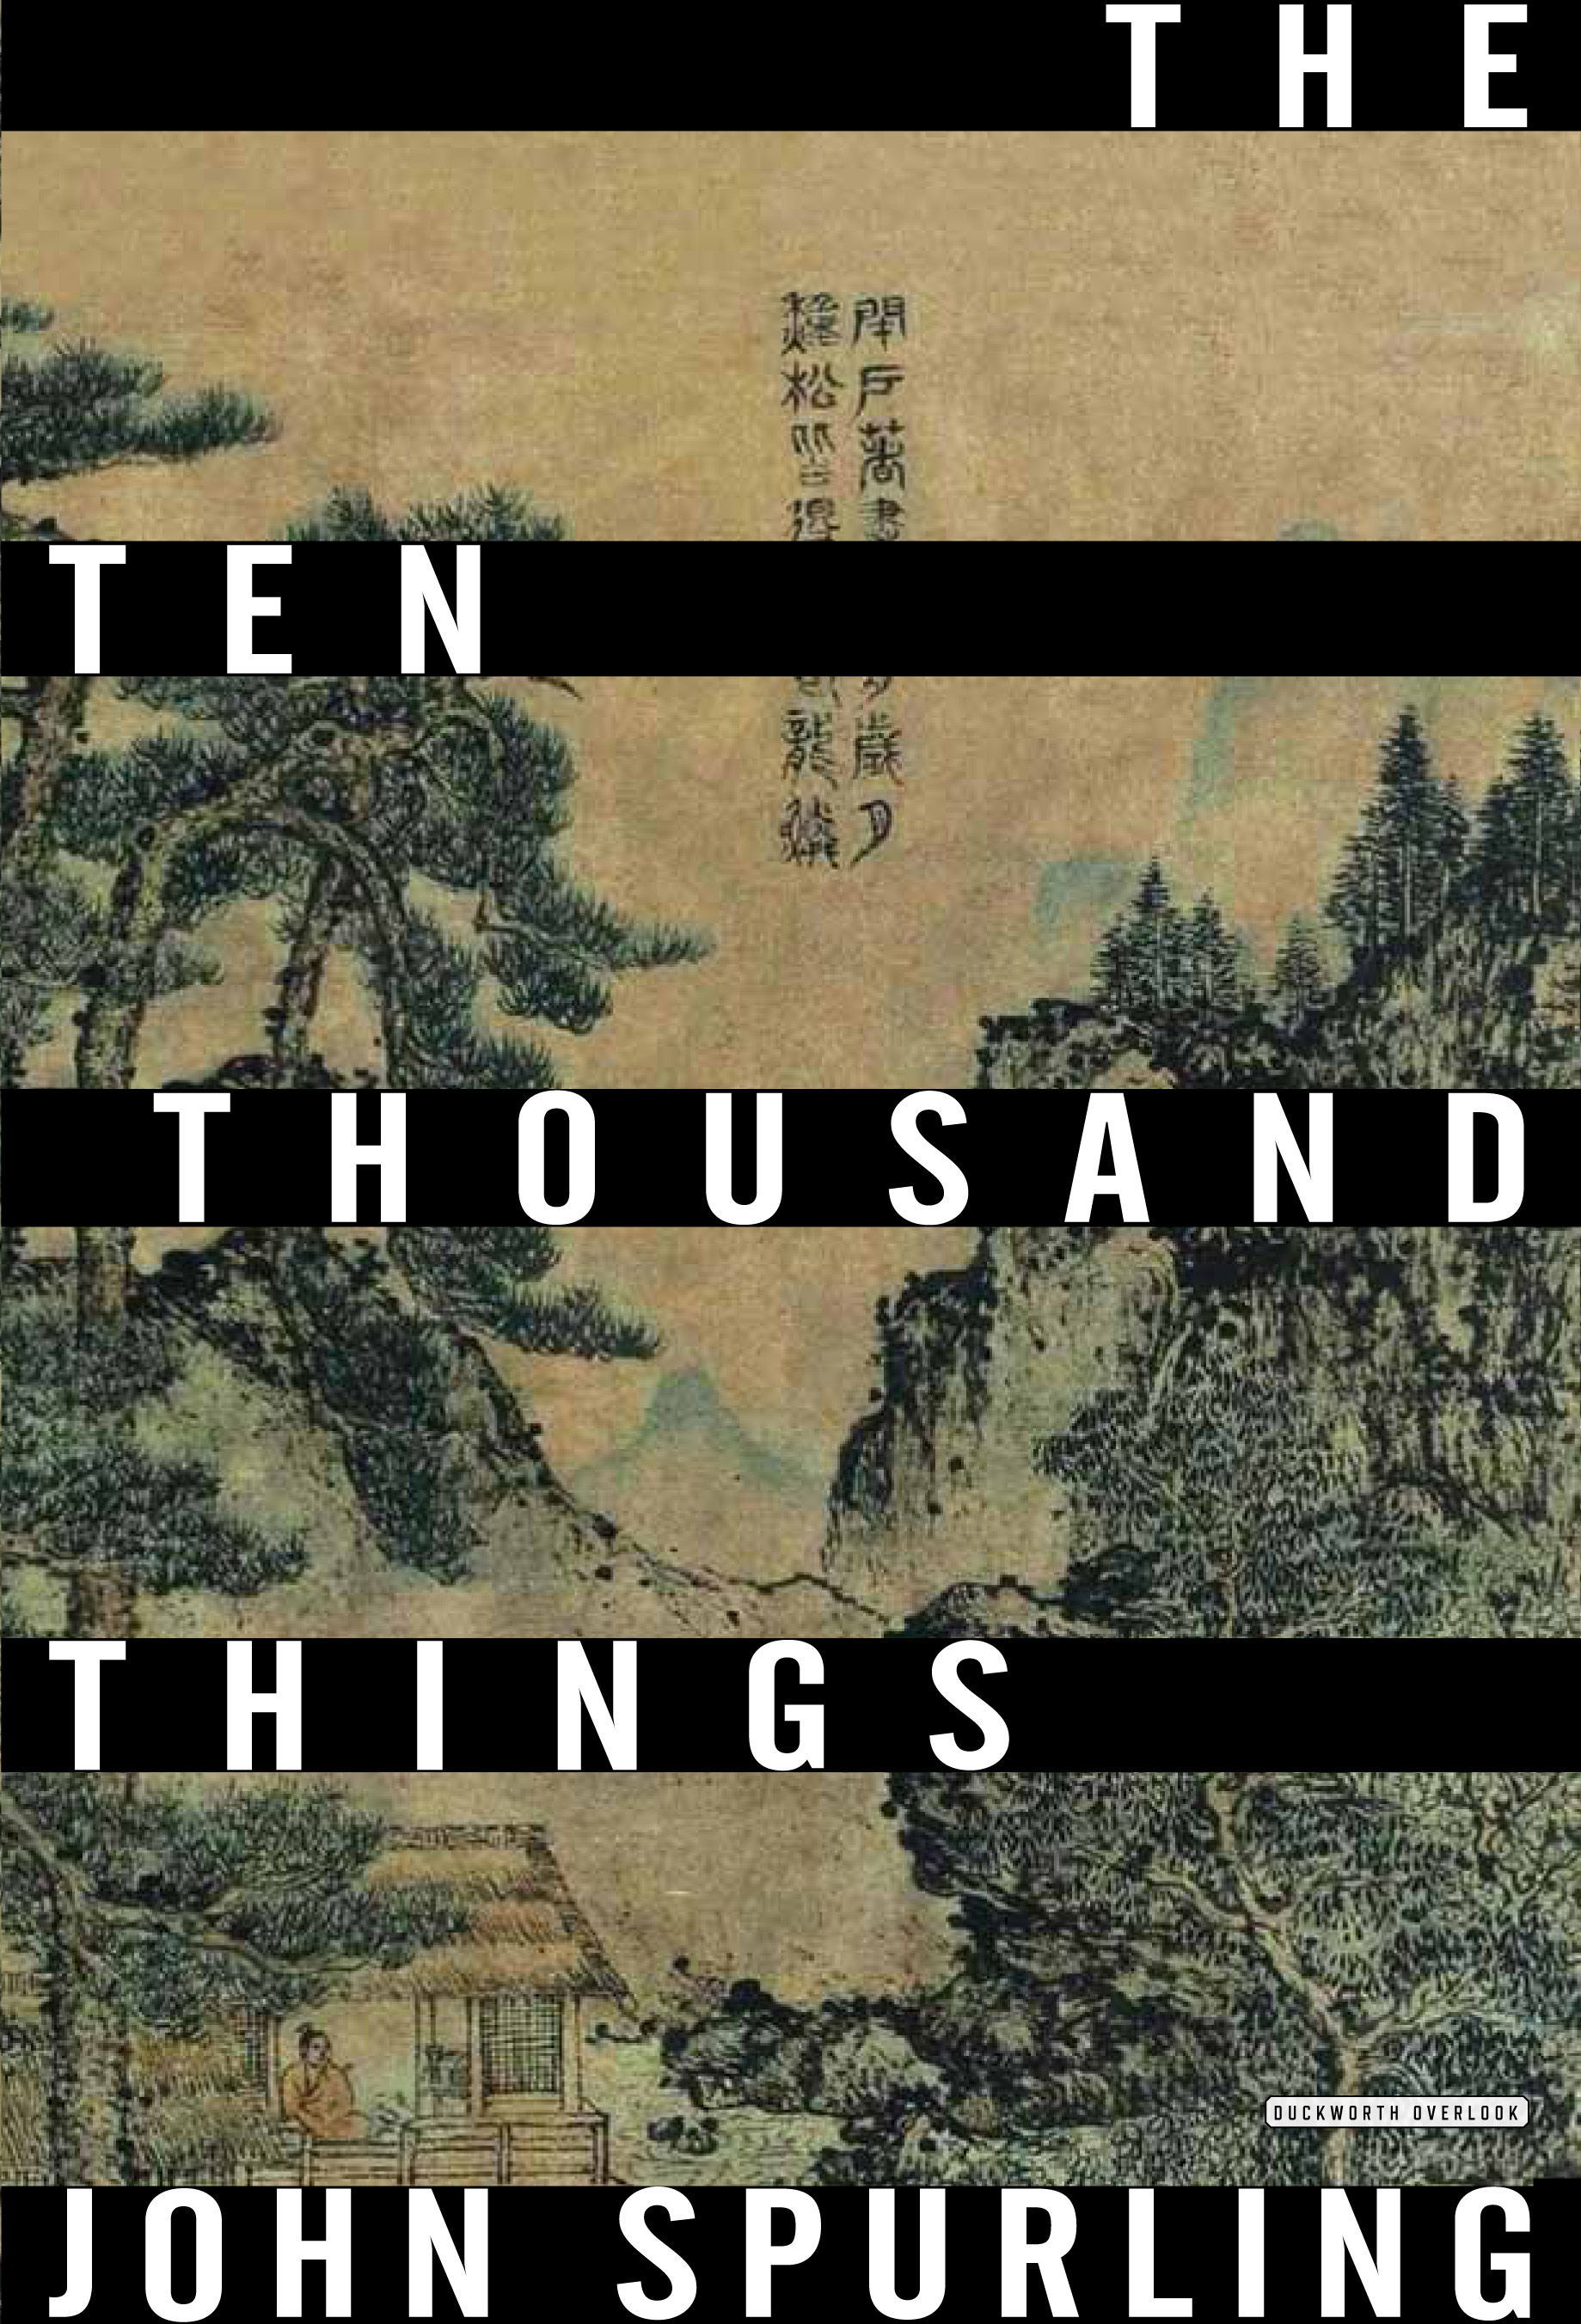 2015: The Ten Thousand Things by John Spurling